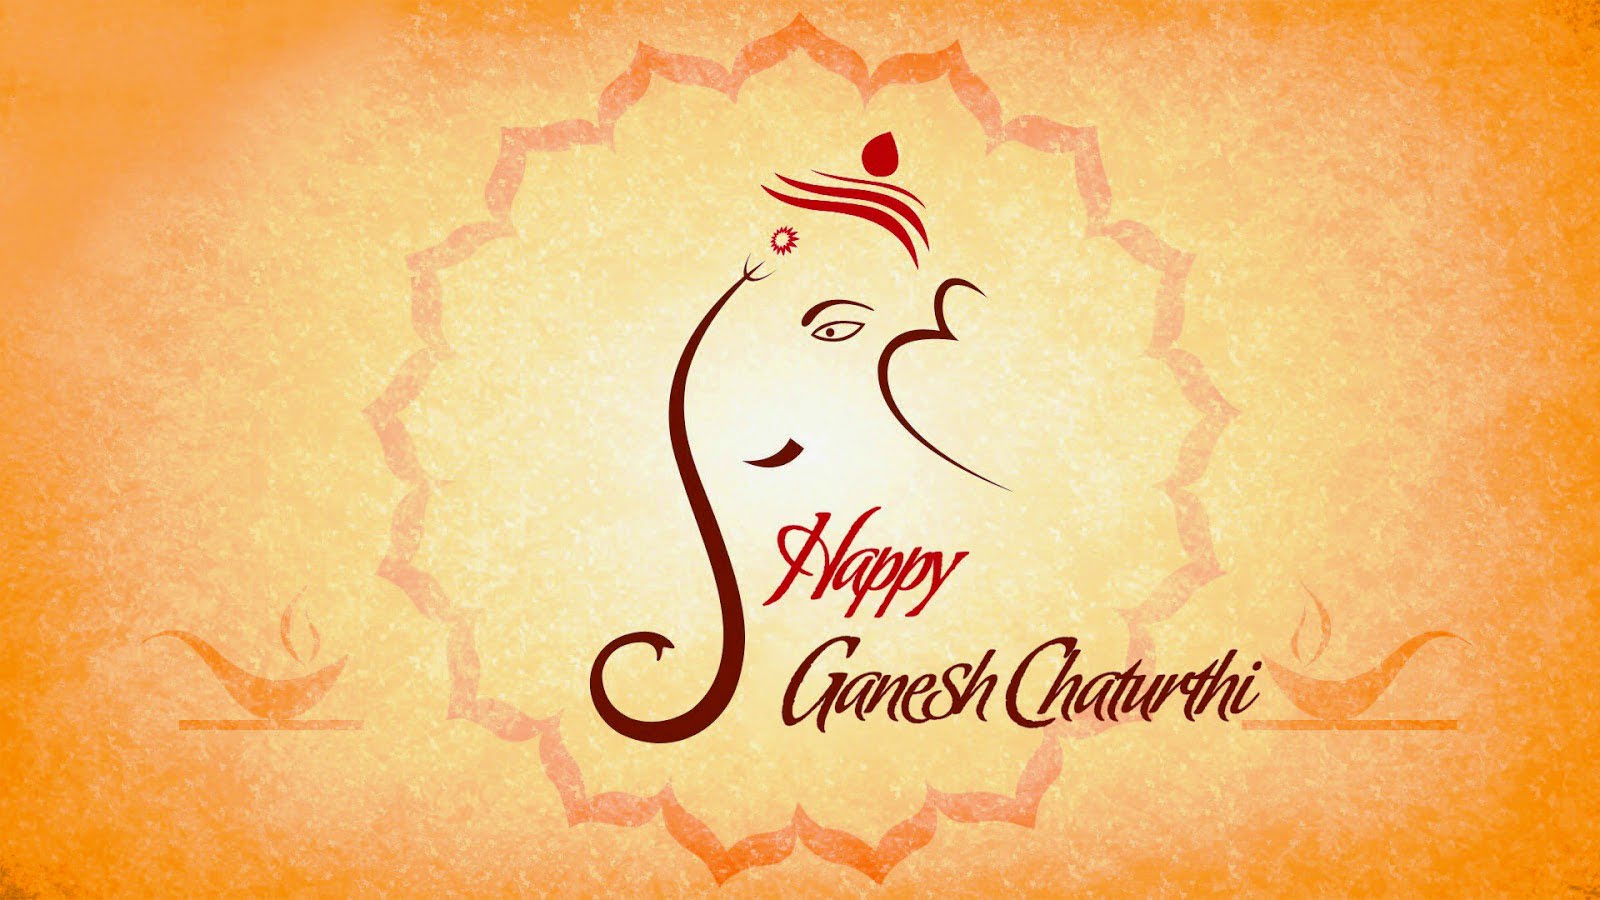 Happy Ganesh Chaturthi 2019 Hd Greeting For Facebook